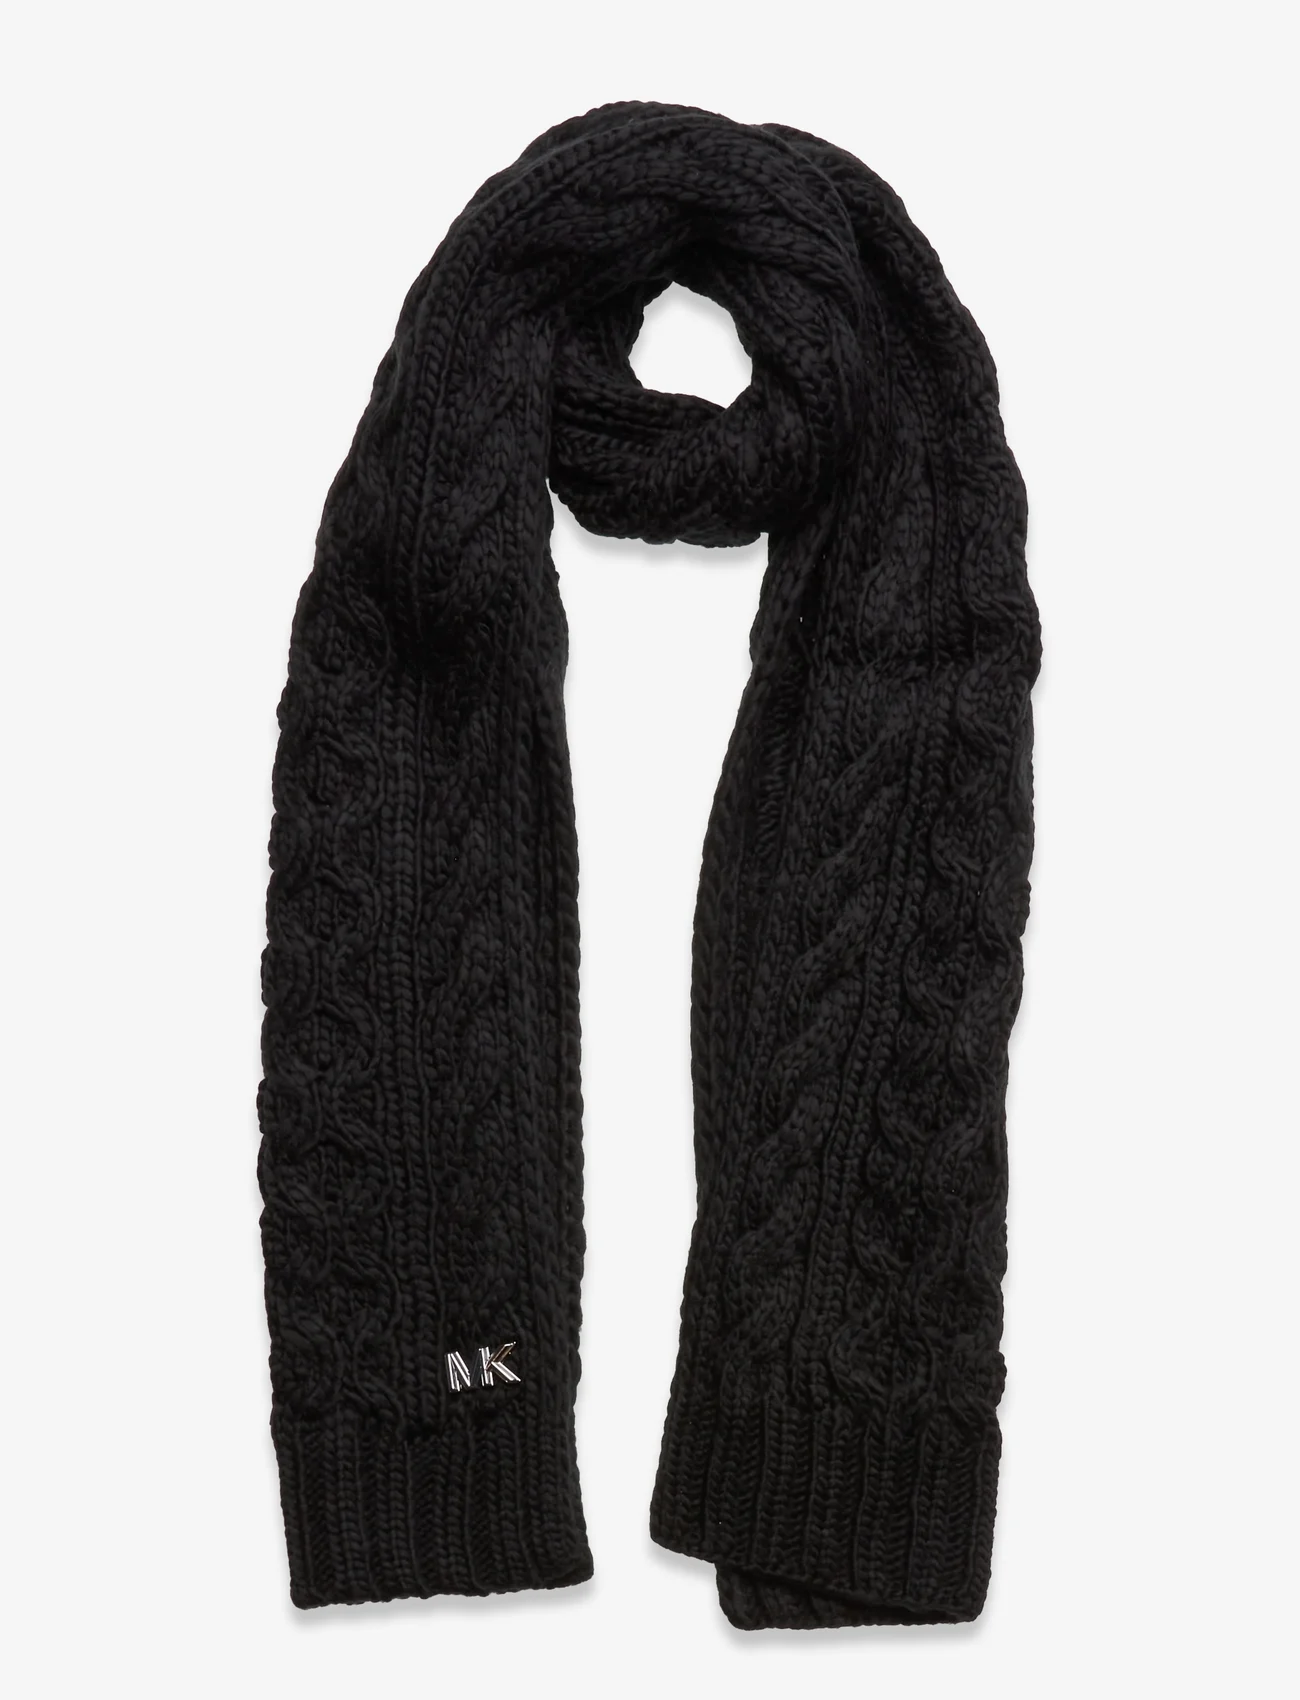 Michael Kors Accessories - Honeycomb cable scarf - winter scarves - black - 0